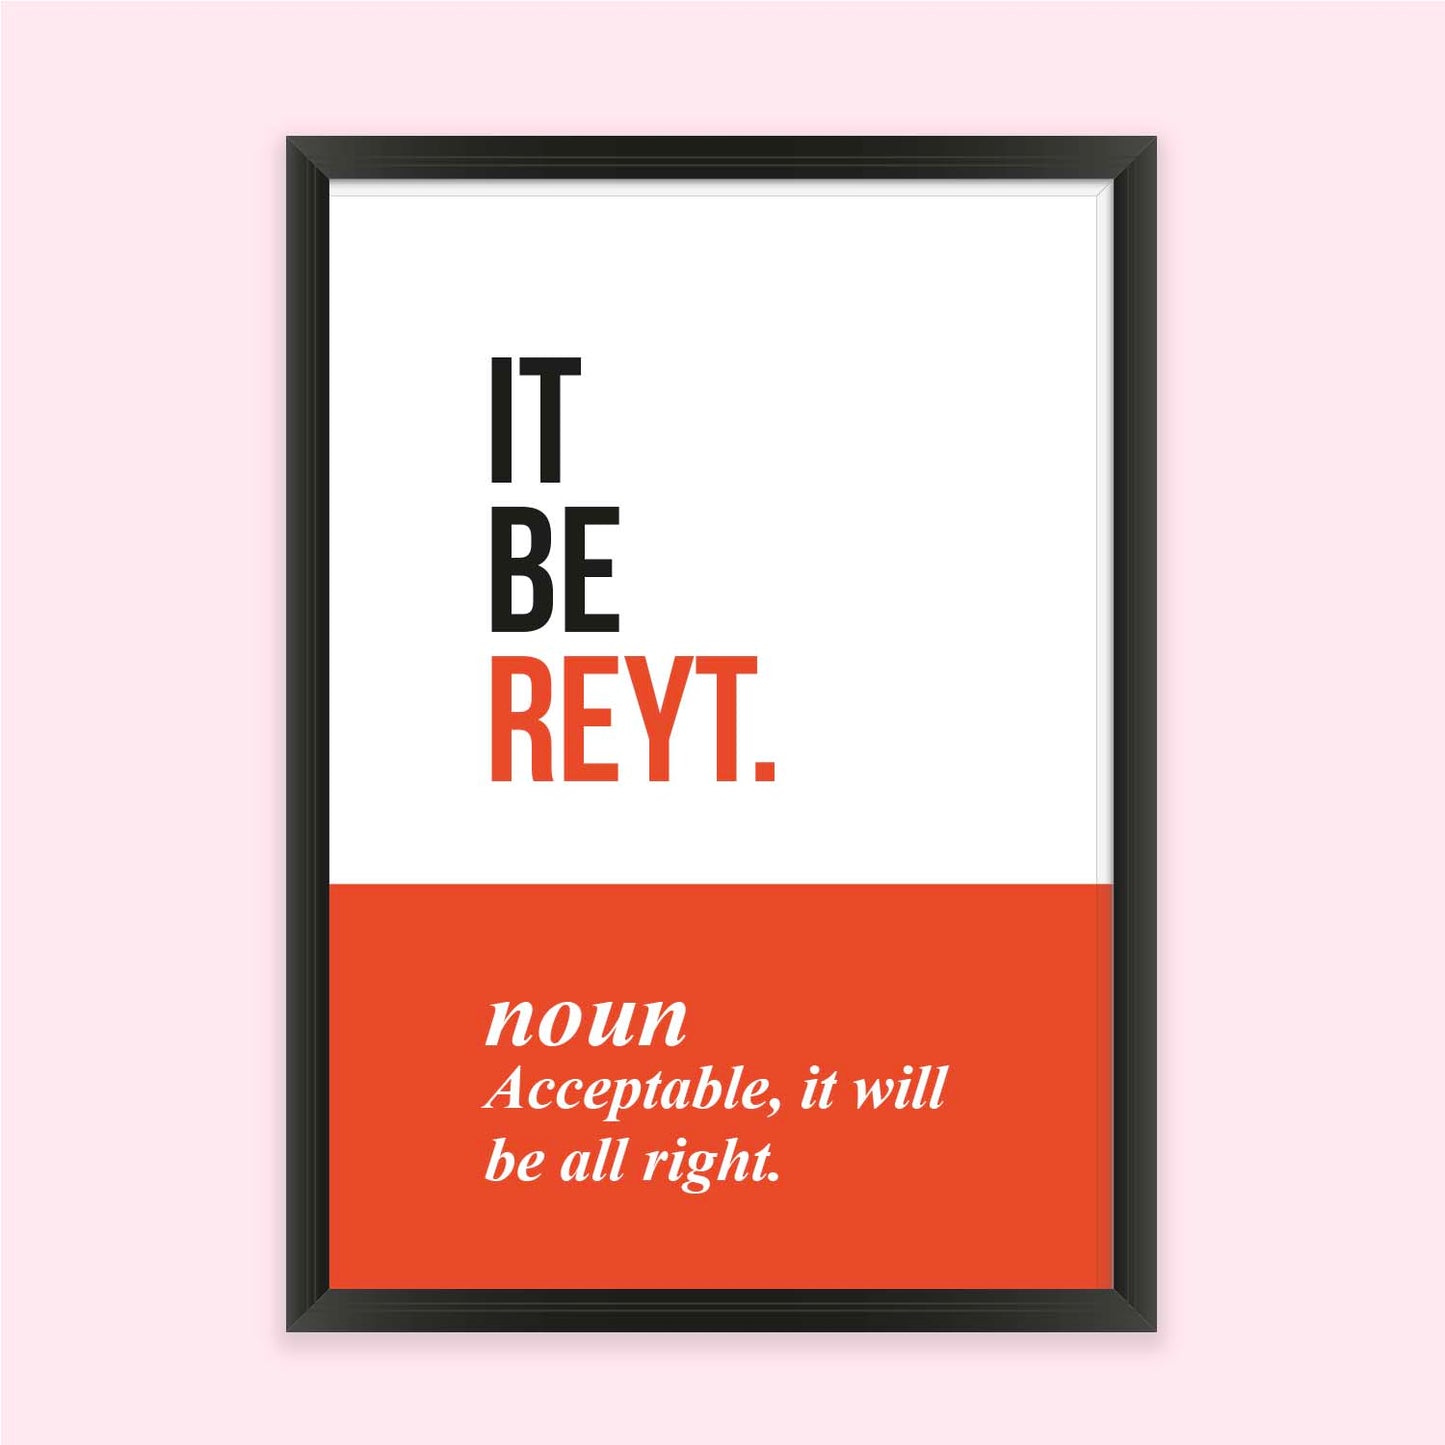 Posi Posters - Yorkshire "It Be Reyt"